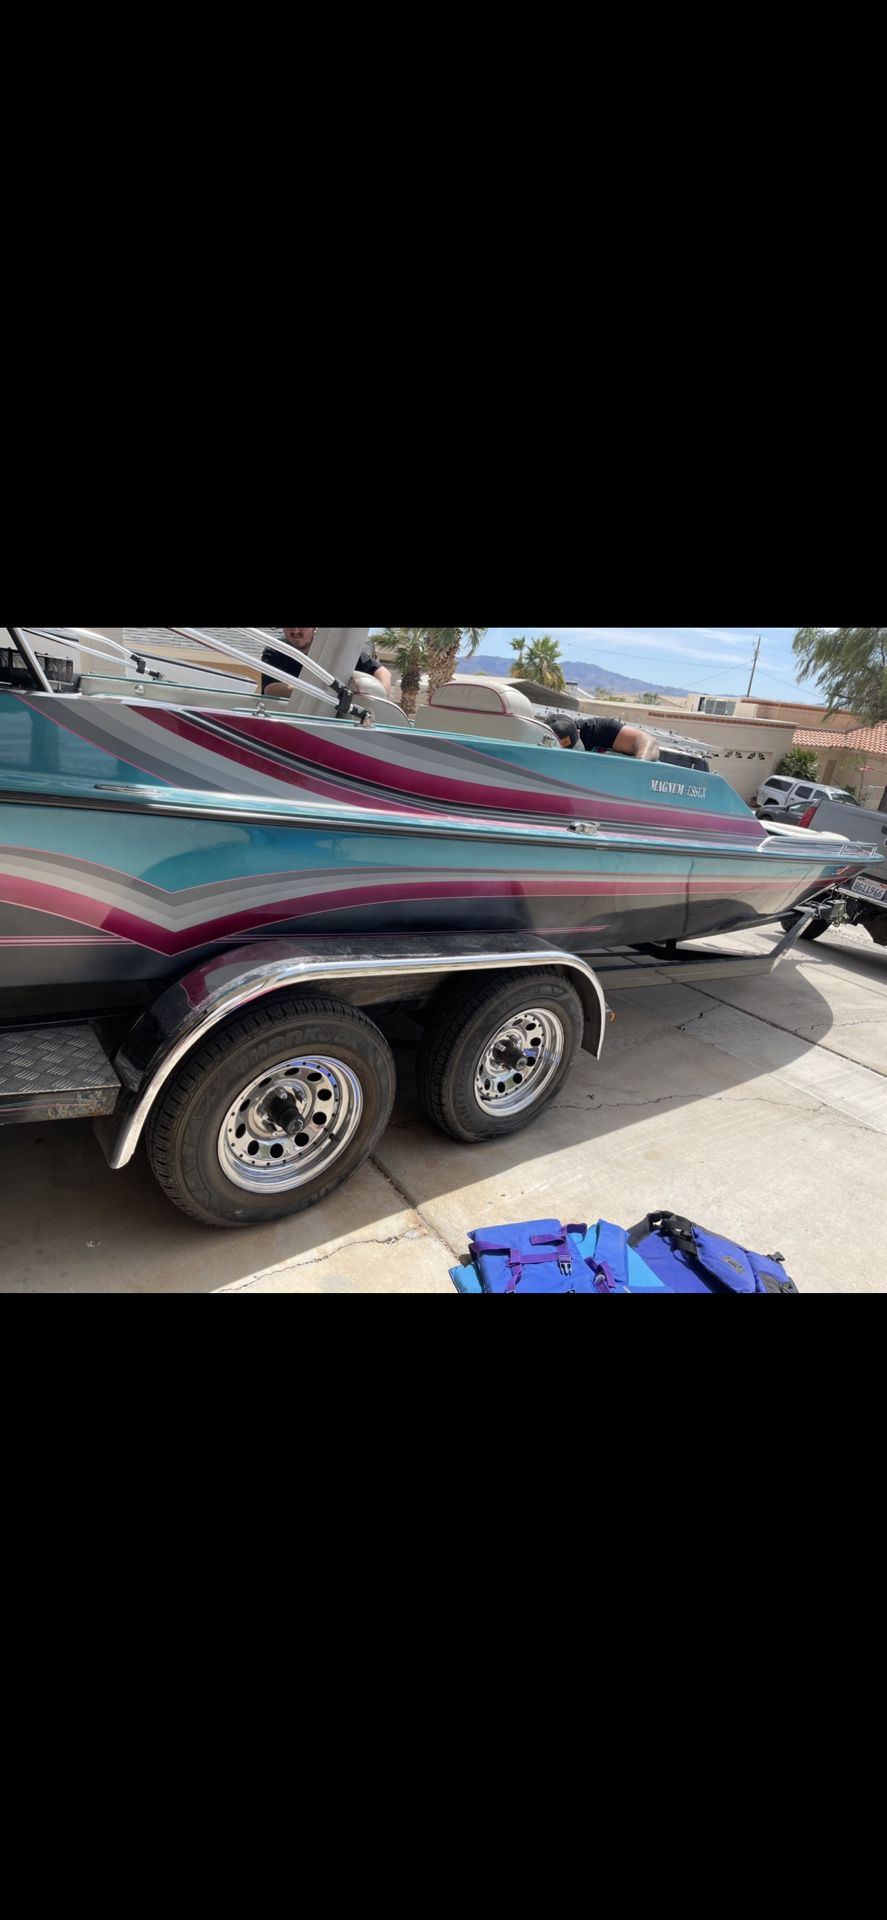 1993 Essex Open Bow Jet Boat 